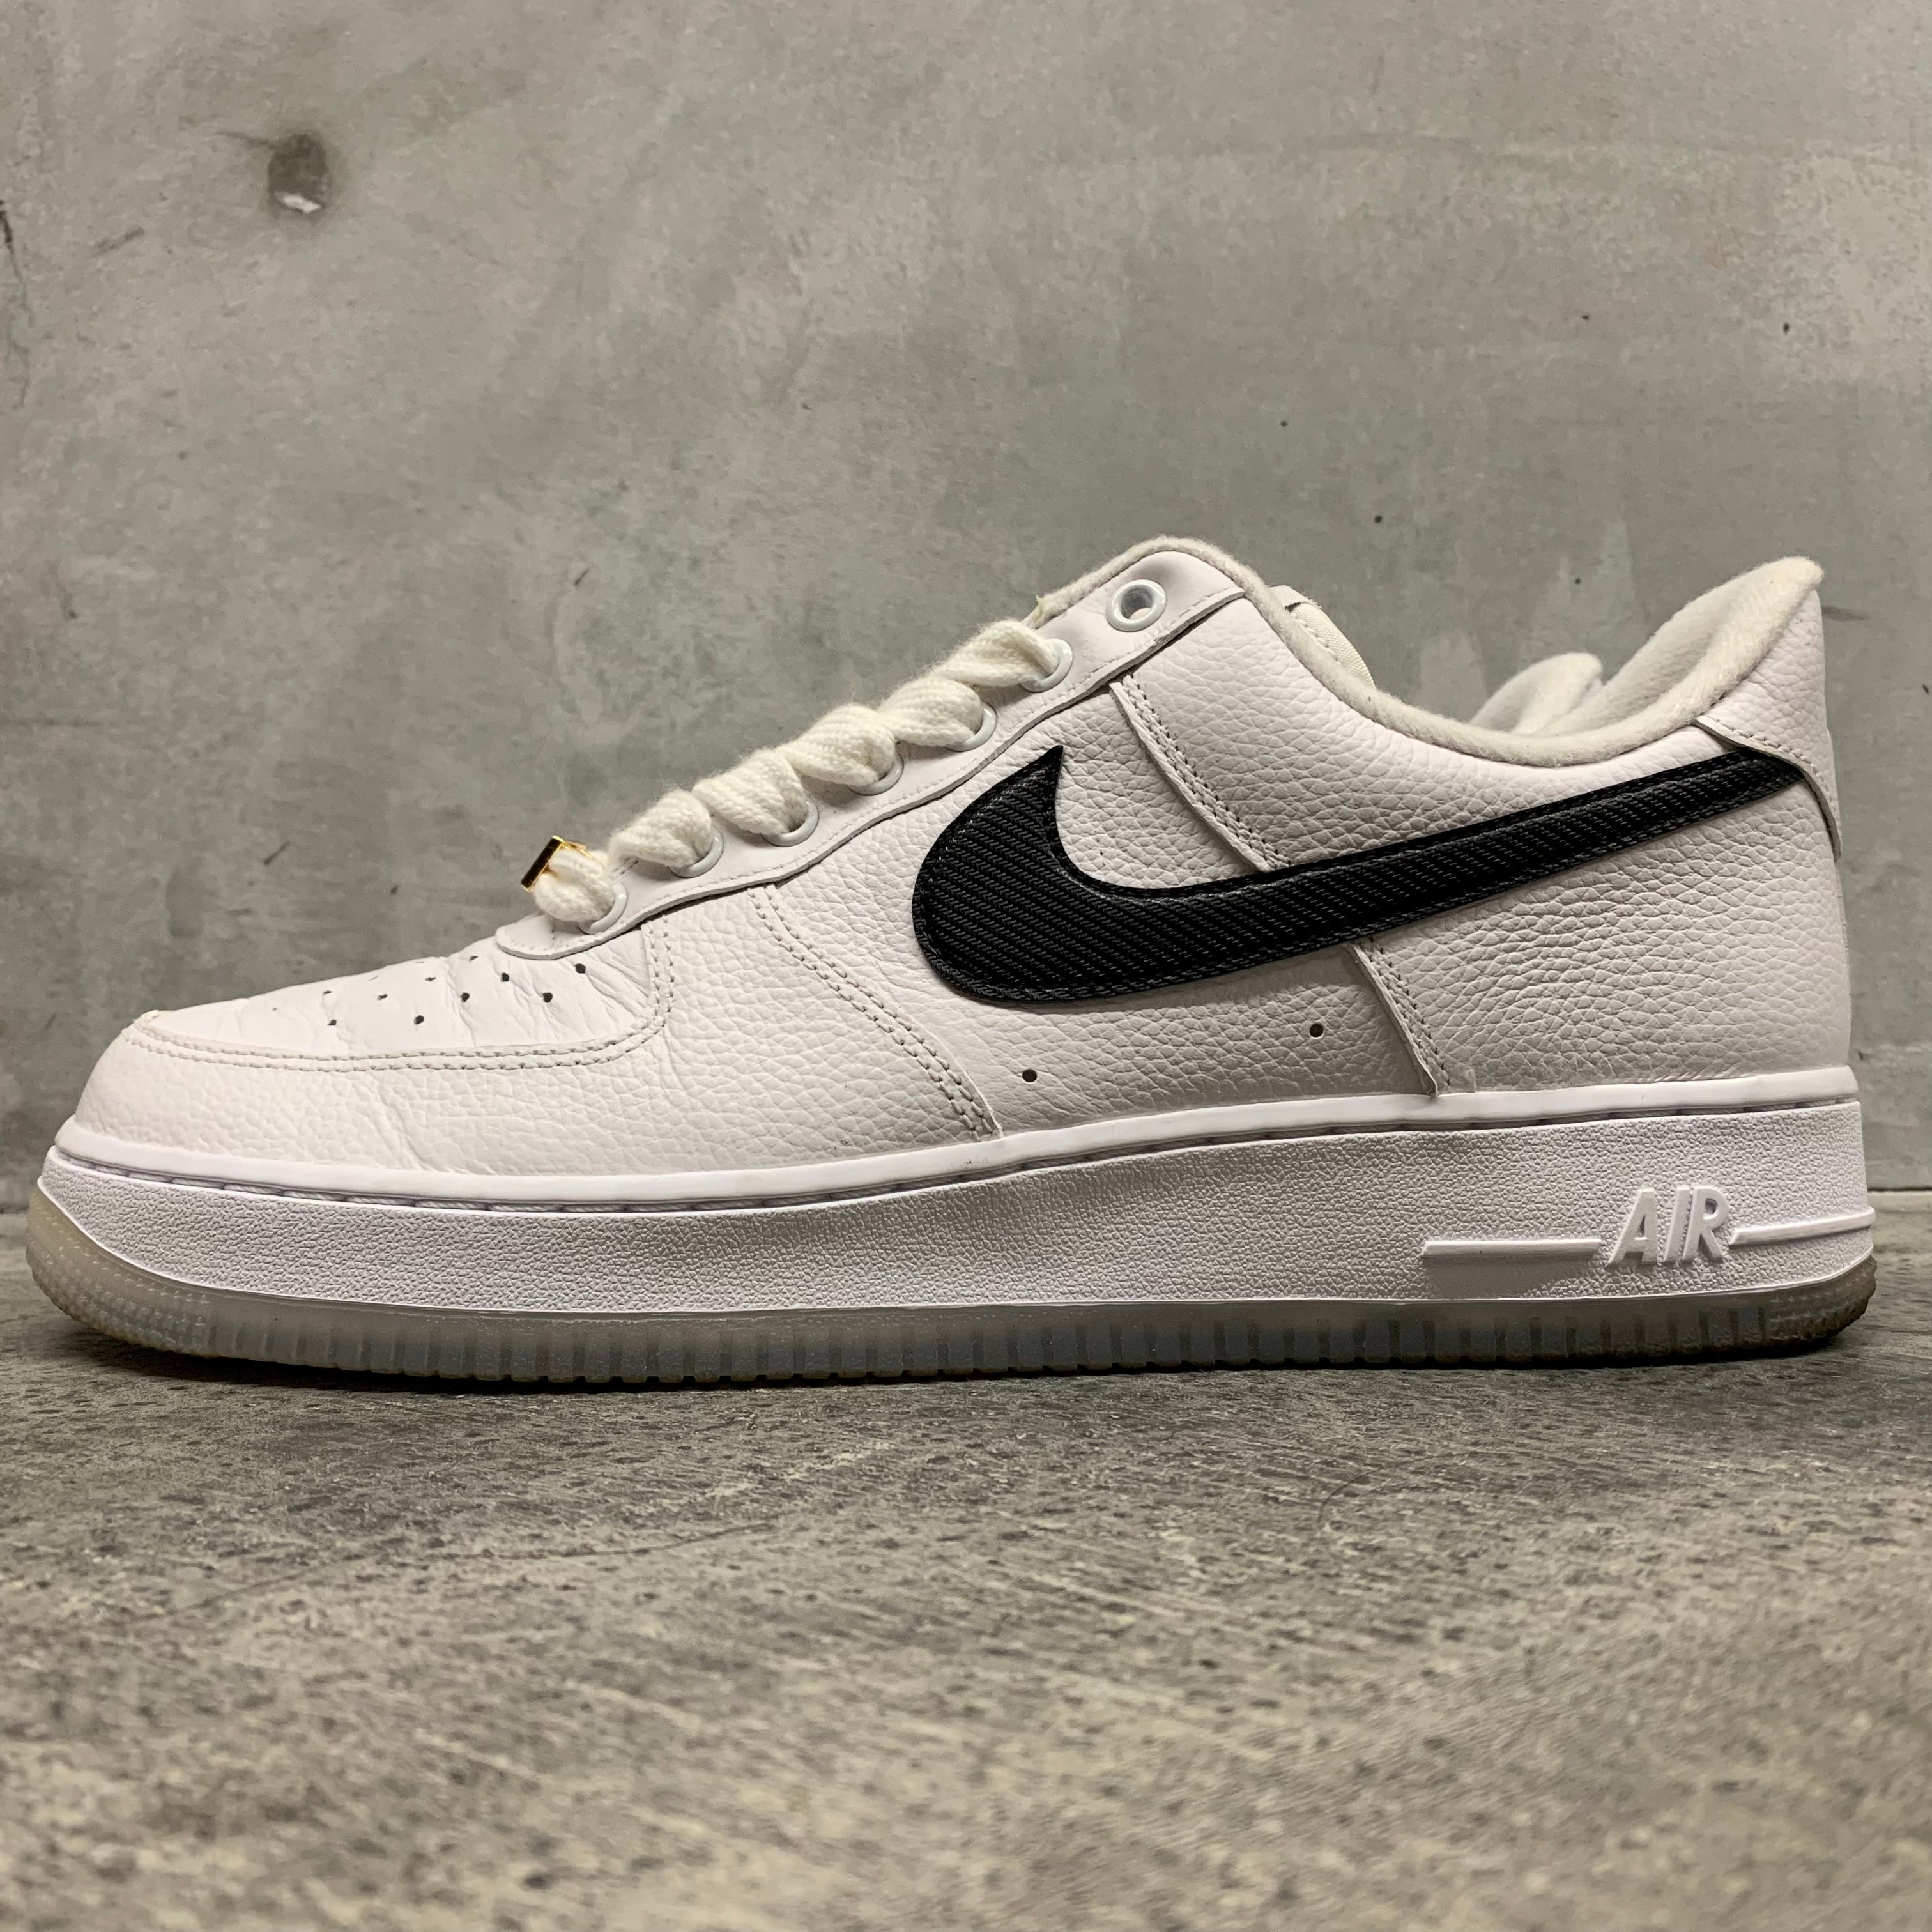 UNDEFEATED Nike Air Force 1 Low SP Total Orange 28cm DV5255-400-